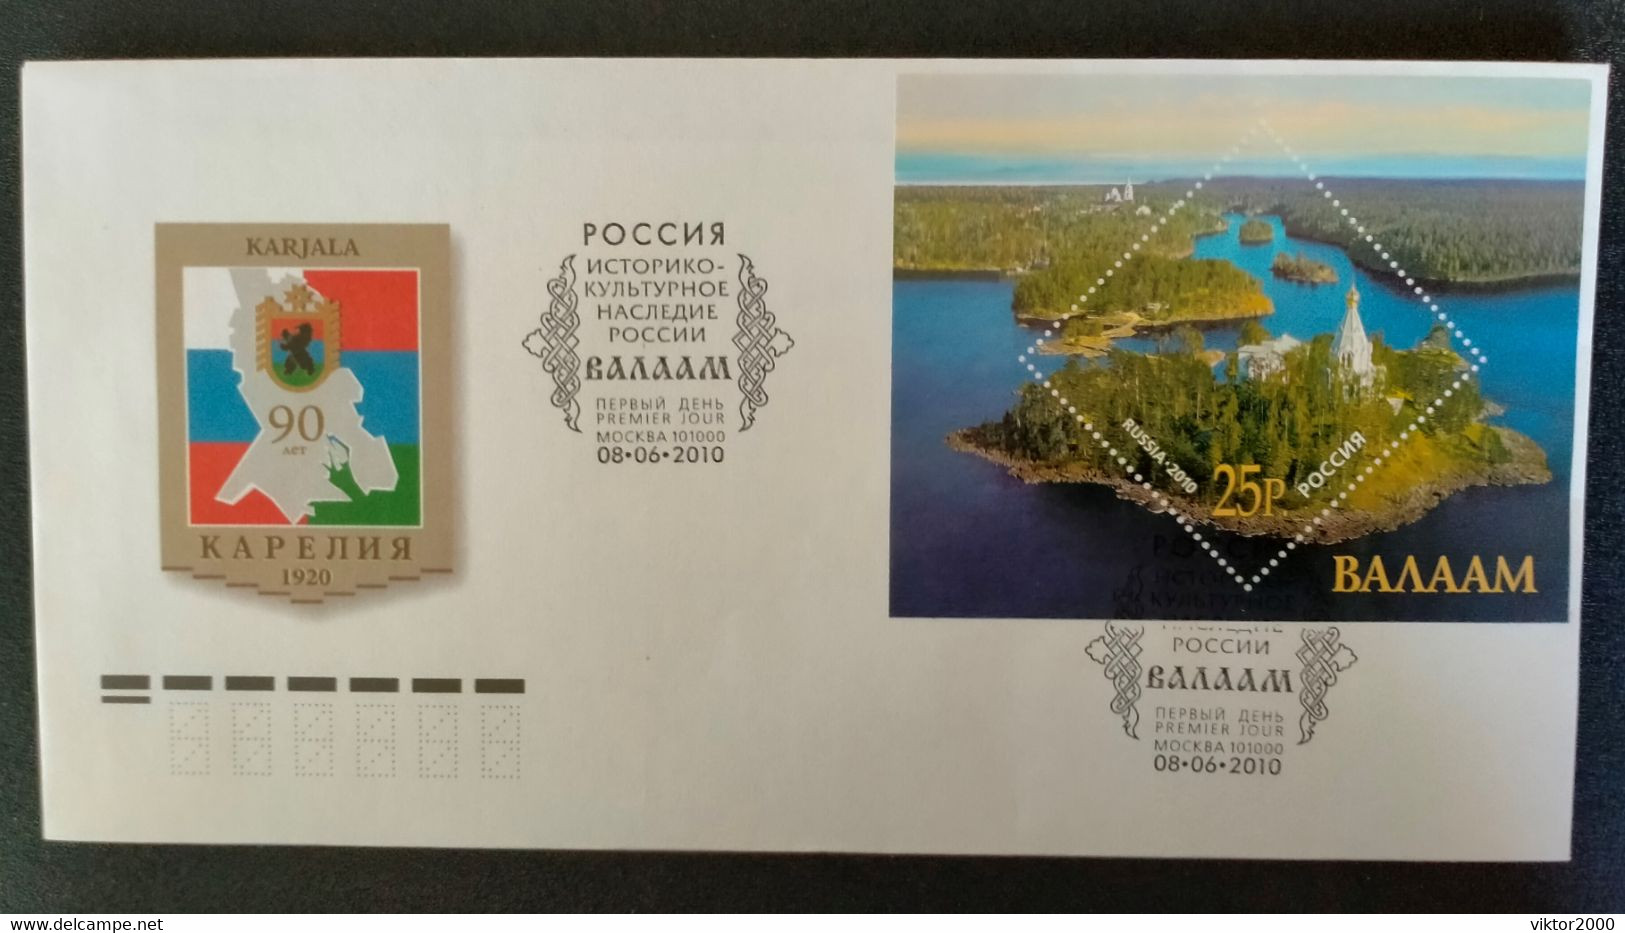 RUSSIA FDC 2010 Tourism - Valaam - FDC